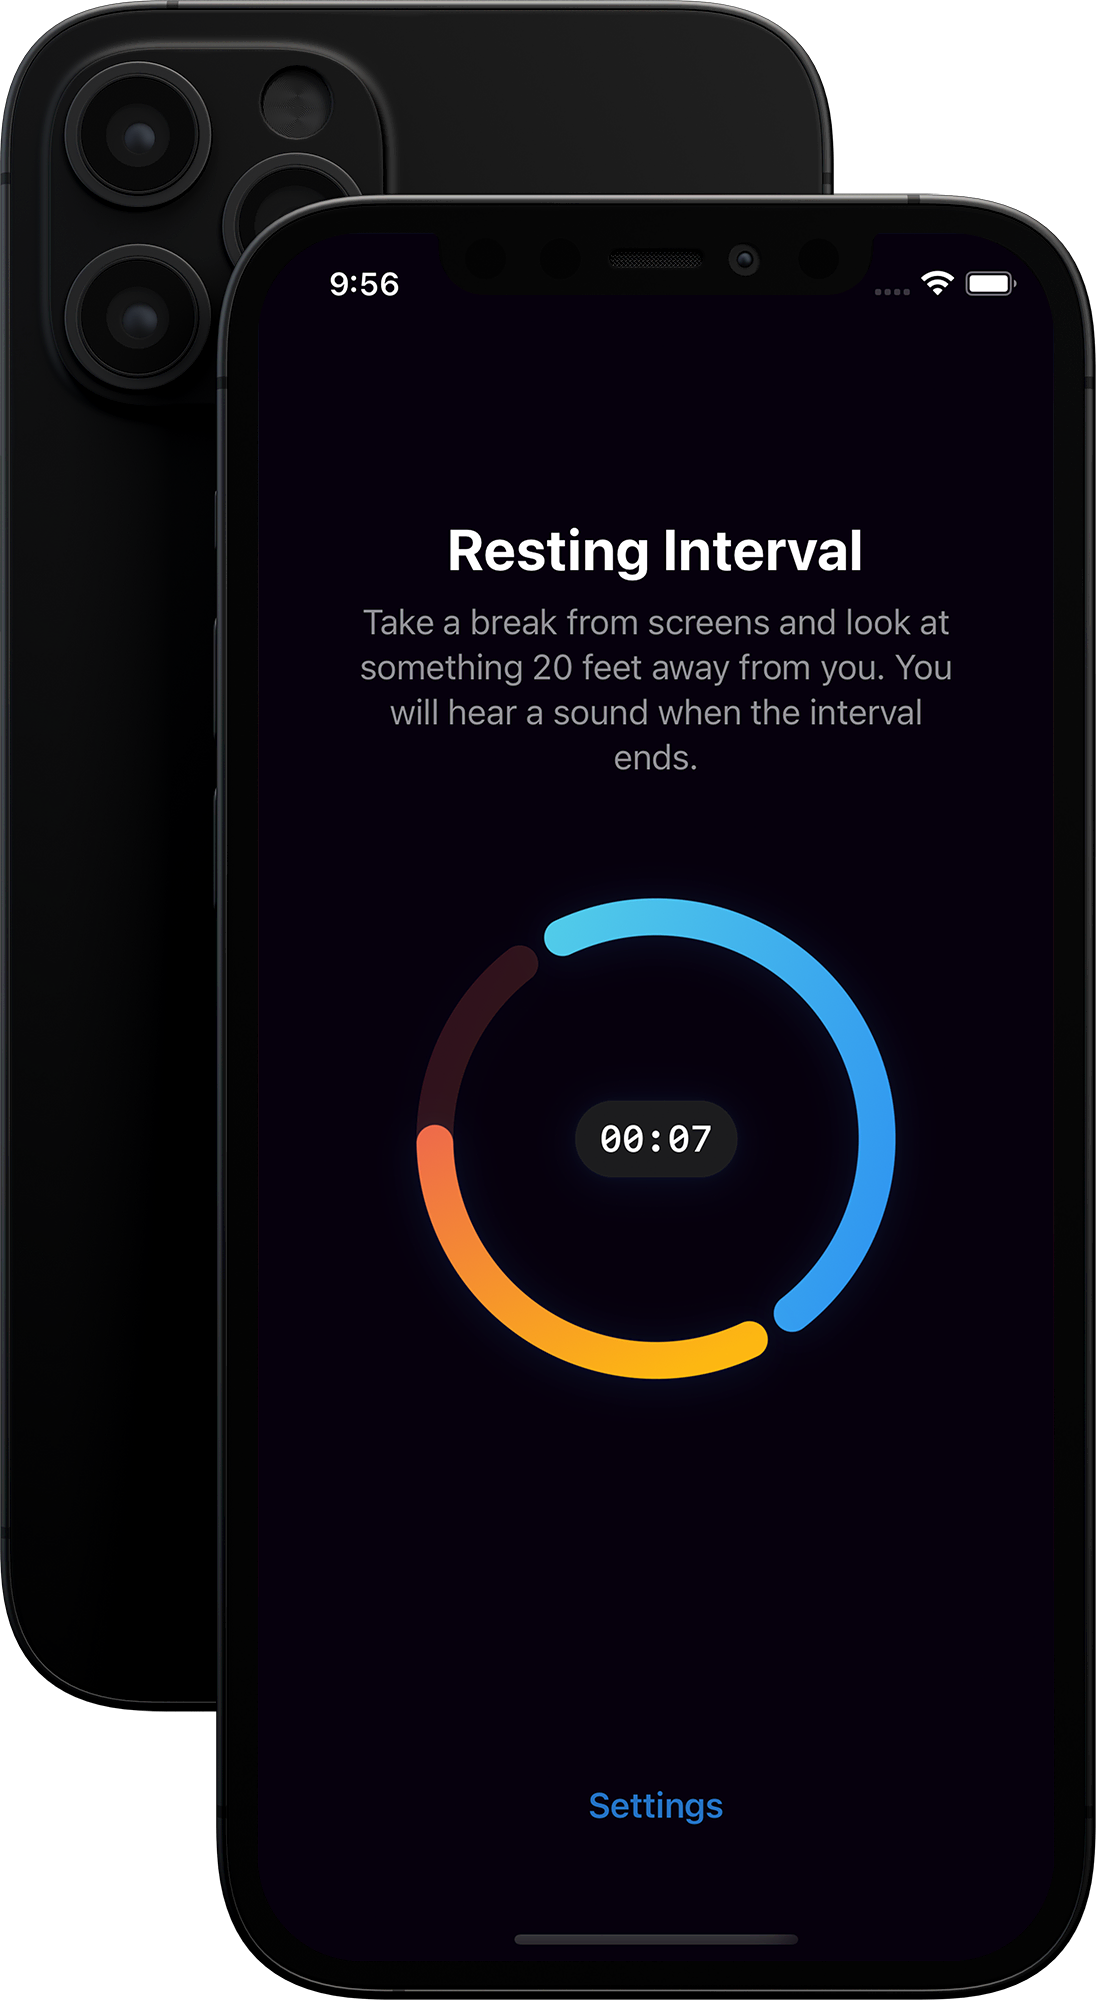 Rest Your Eyes App running in an iPhone with Dark Mode activated